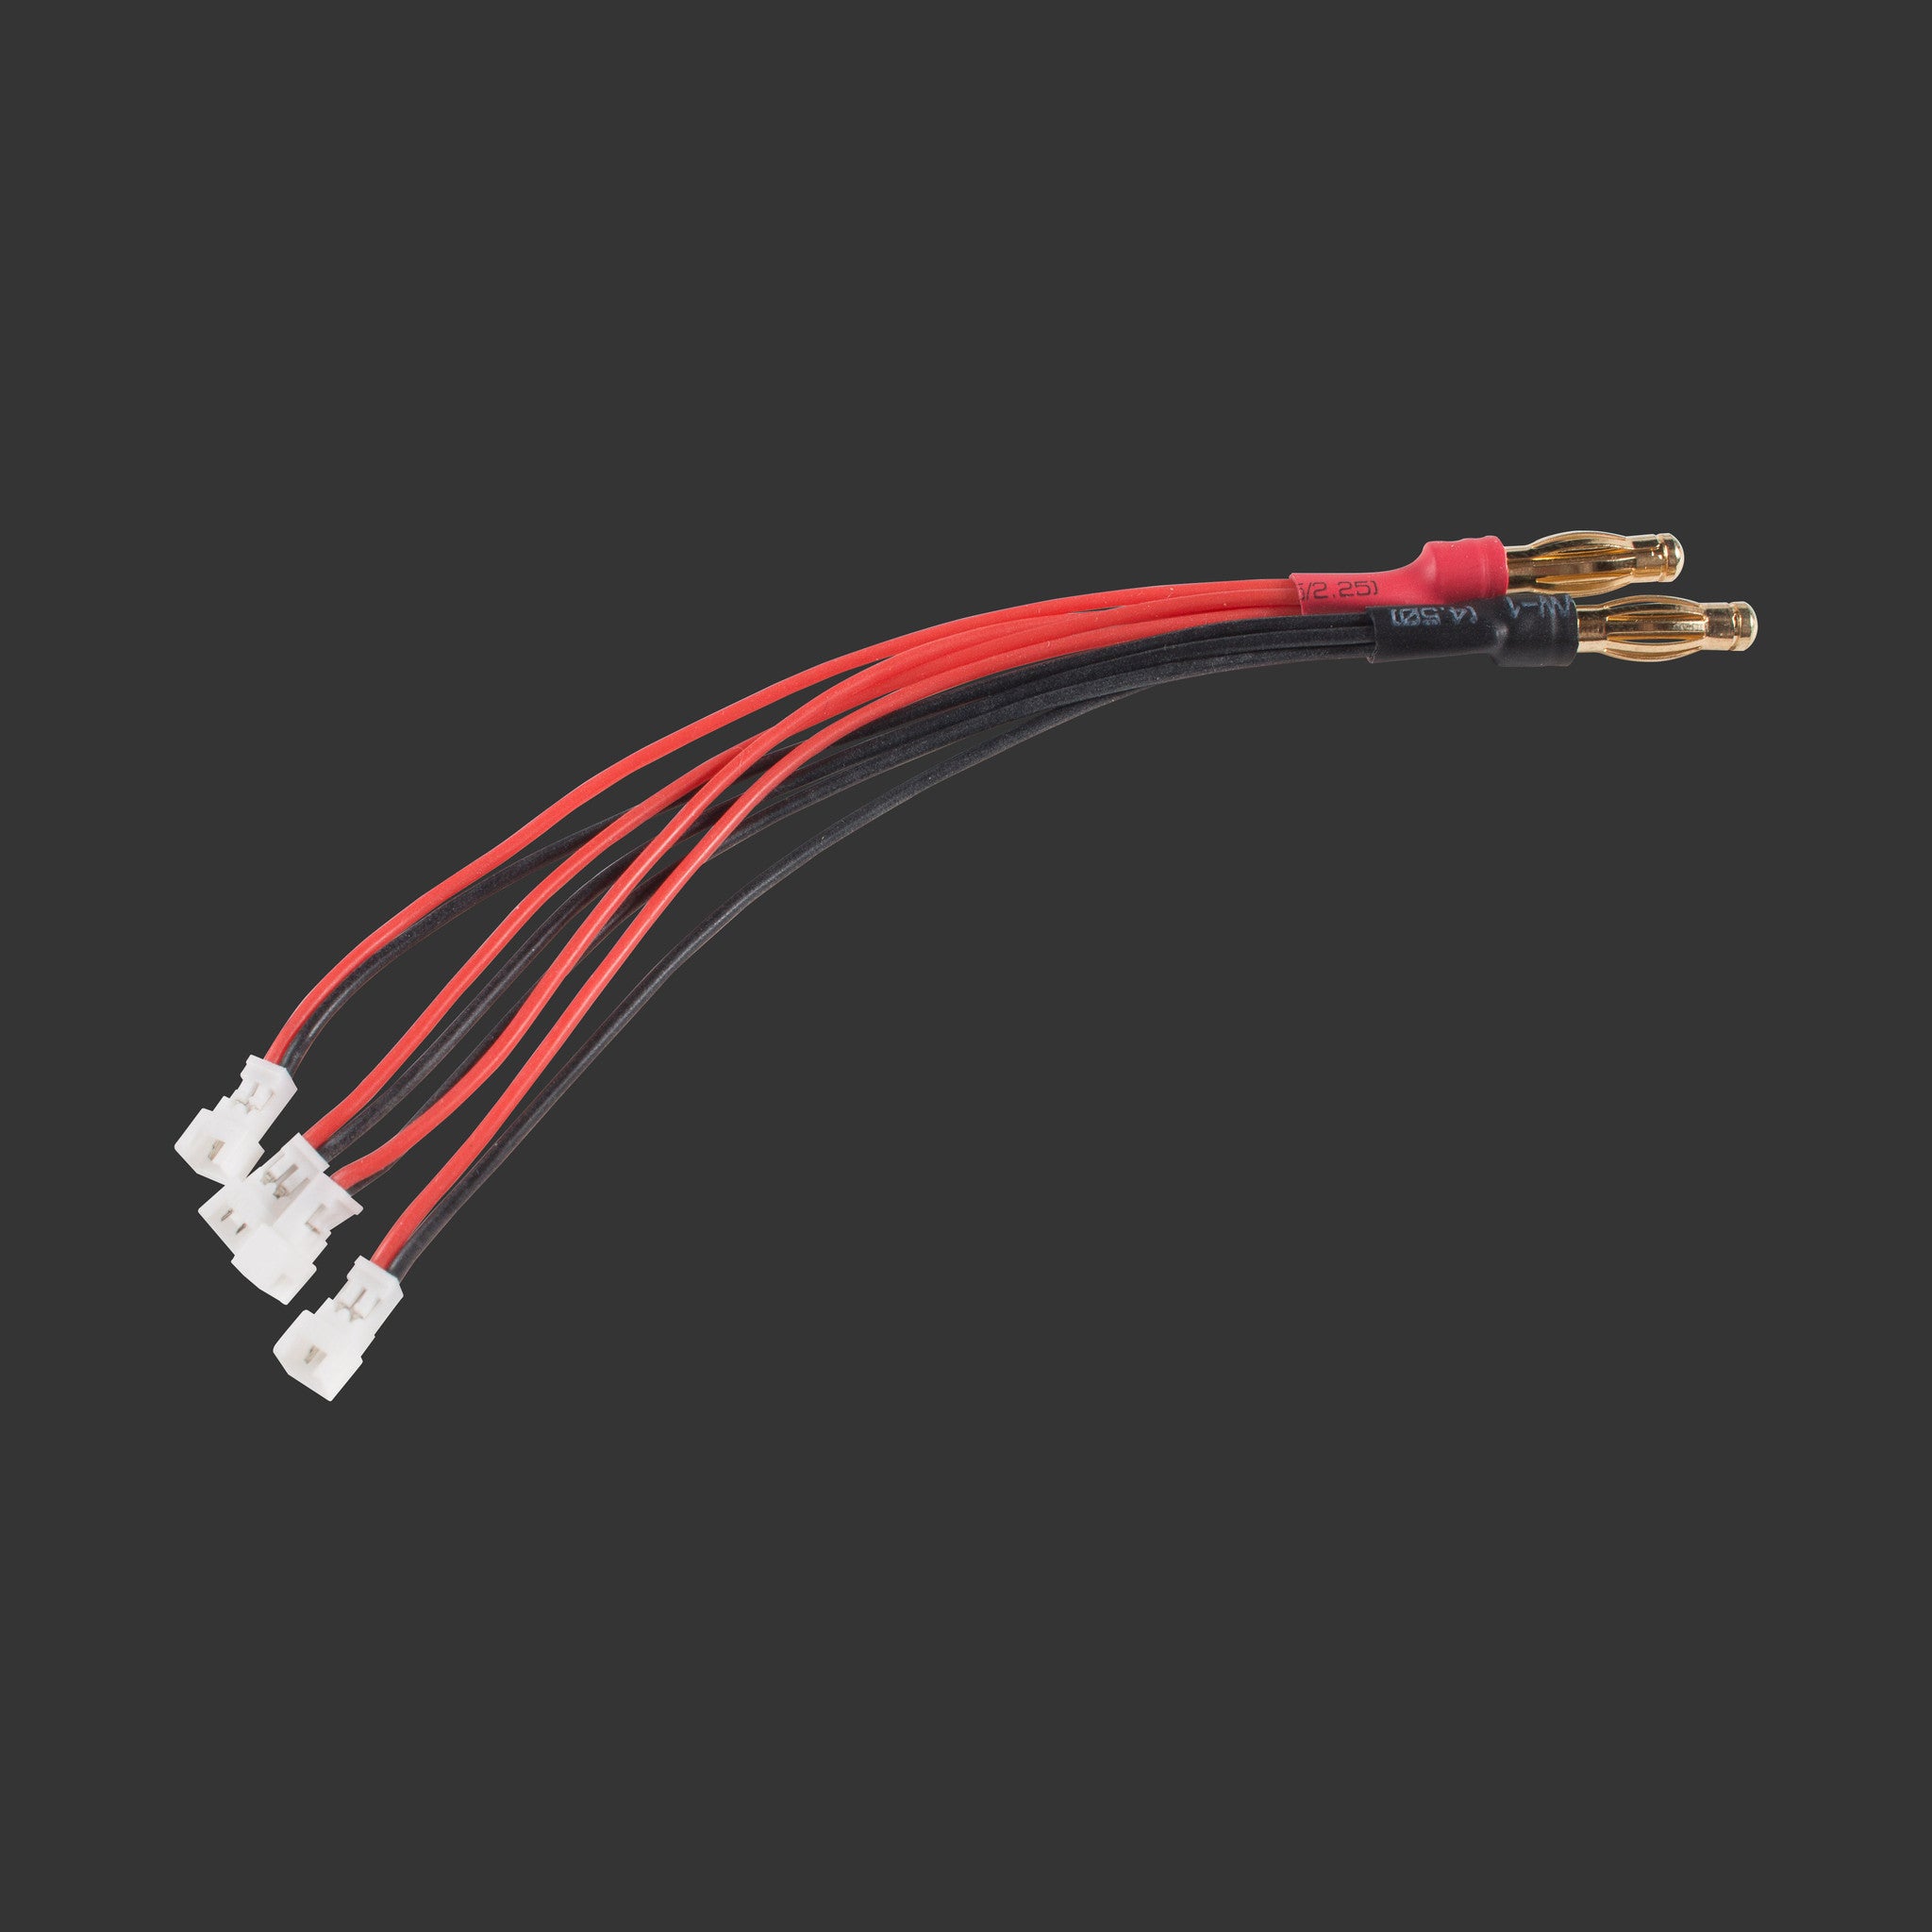 4-Way Parallel Charging Harness Cable - JST-PH 1.25 (or known as Micro JST)